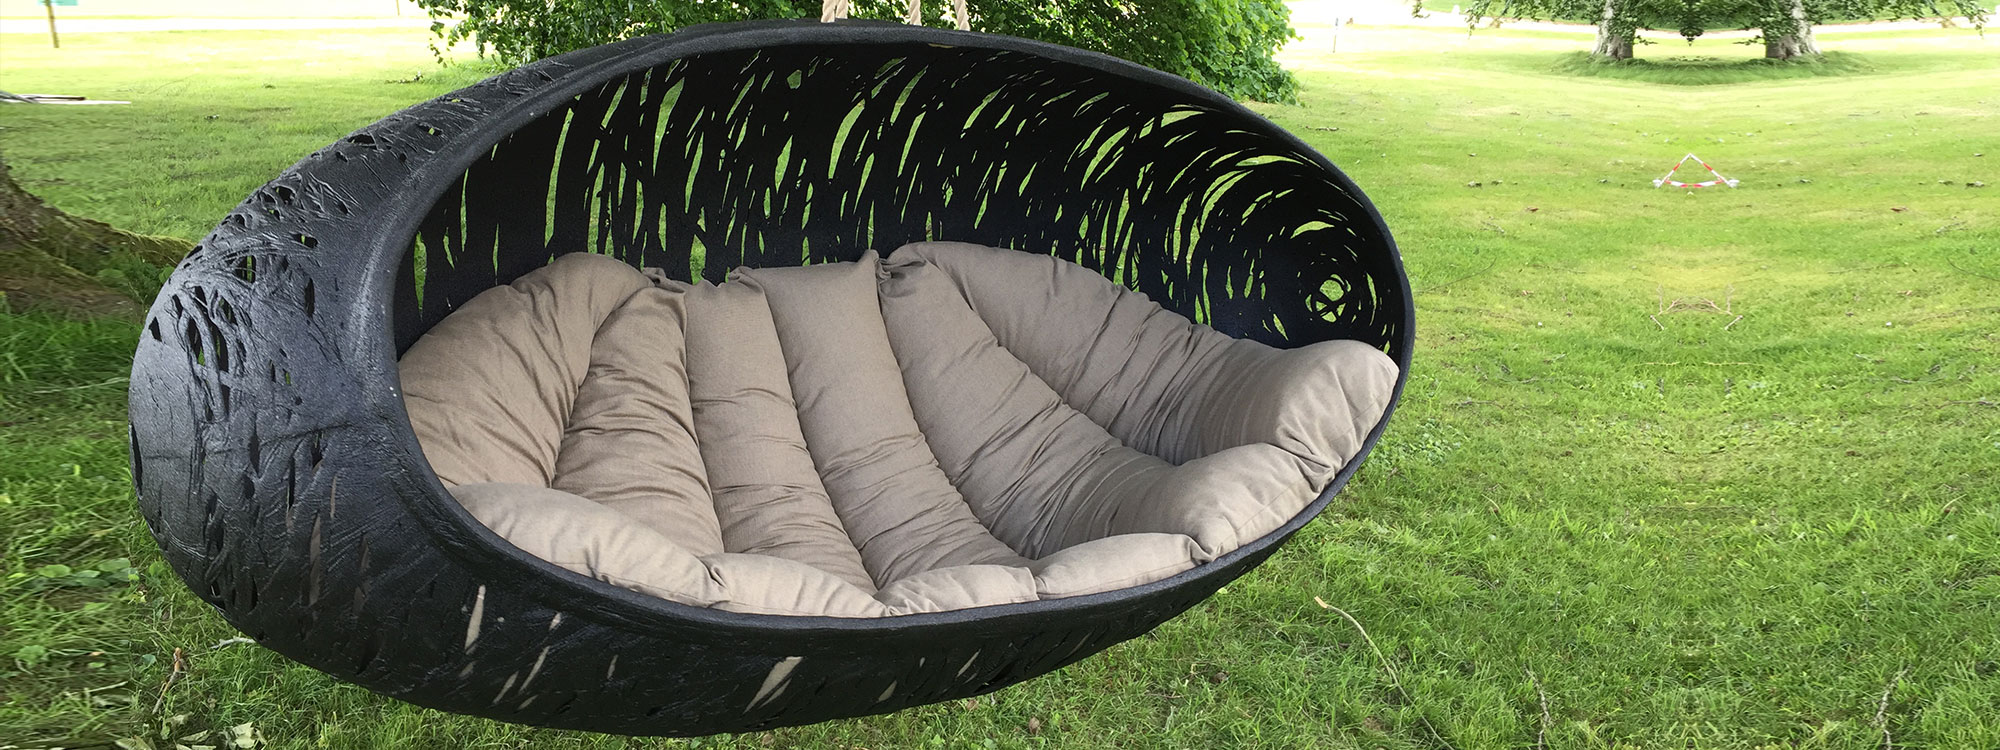 Bios Alpha modern garden swing seat is a magical hanging garden sofa & luxury sofa swing for 2-3 adults by Unknown high performance furniture.